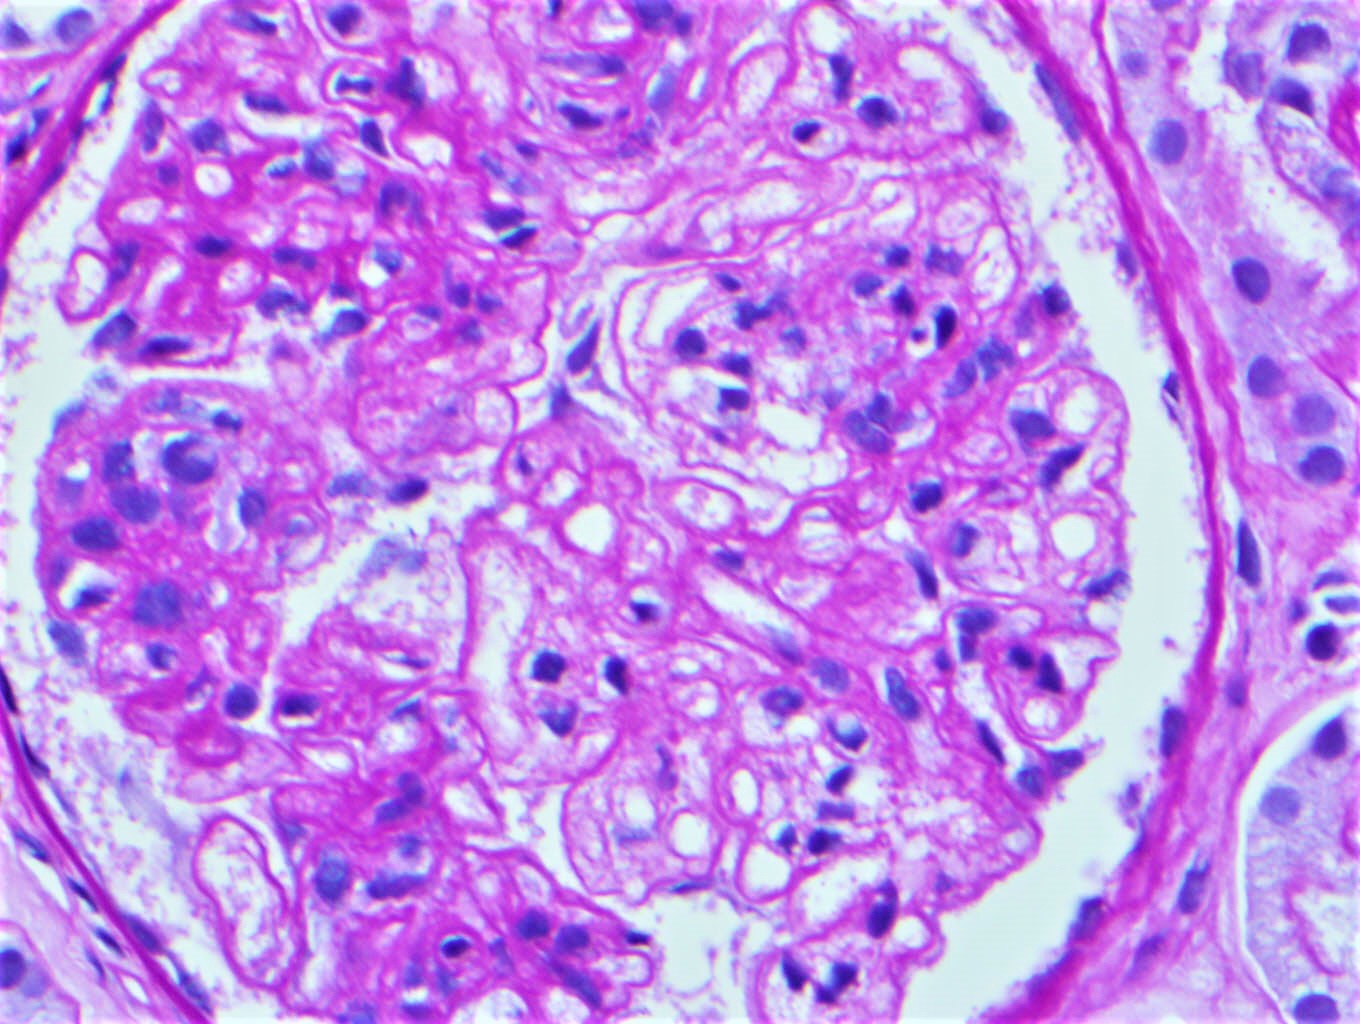 Mesangiolysis in a case of TMA with monoclonal gammopathy